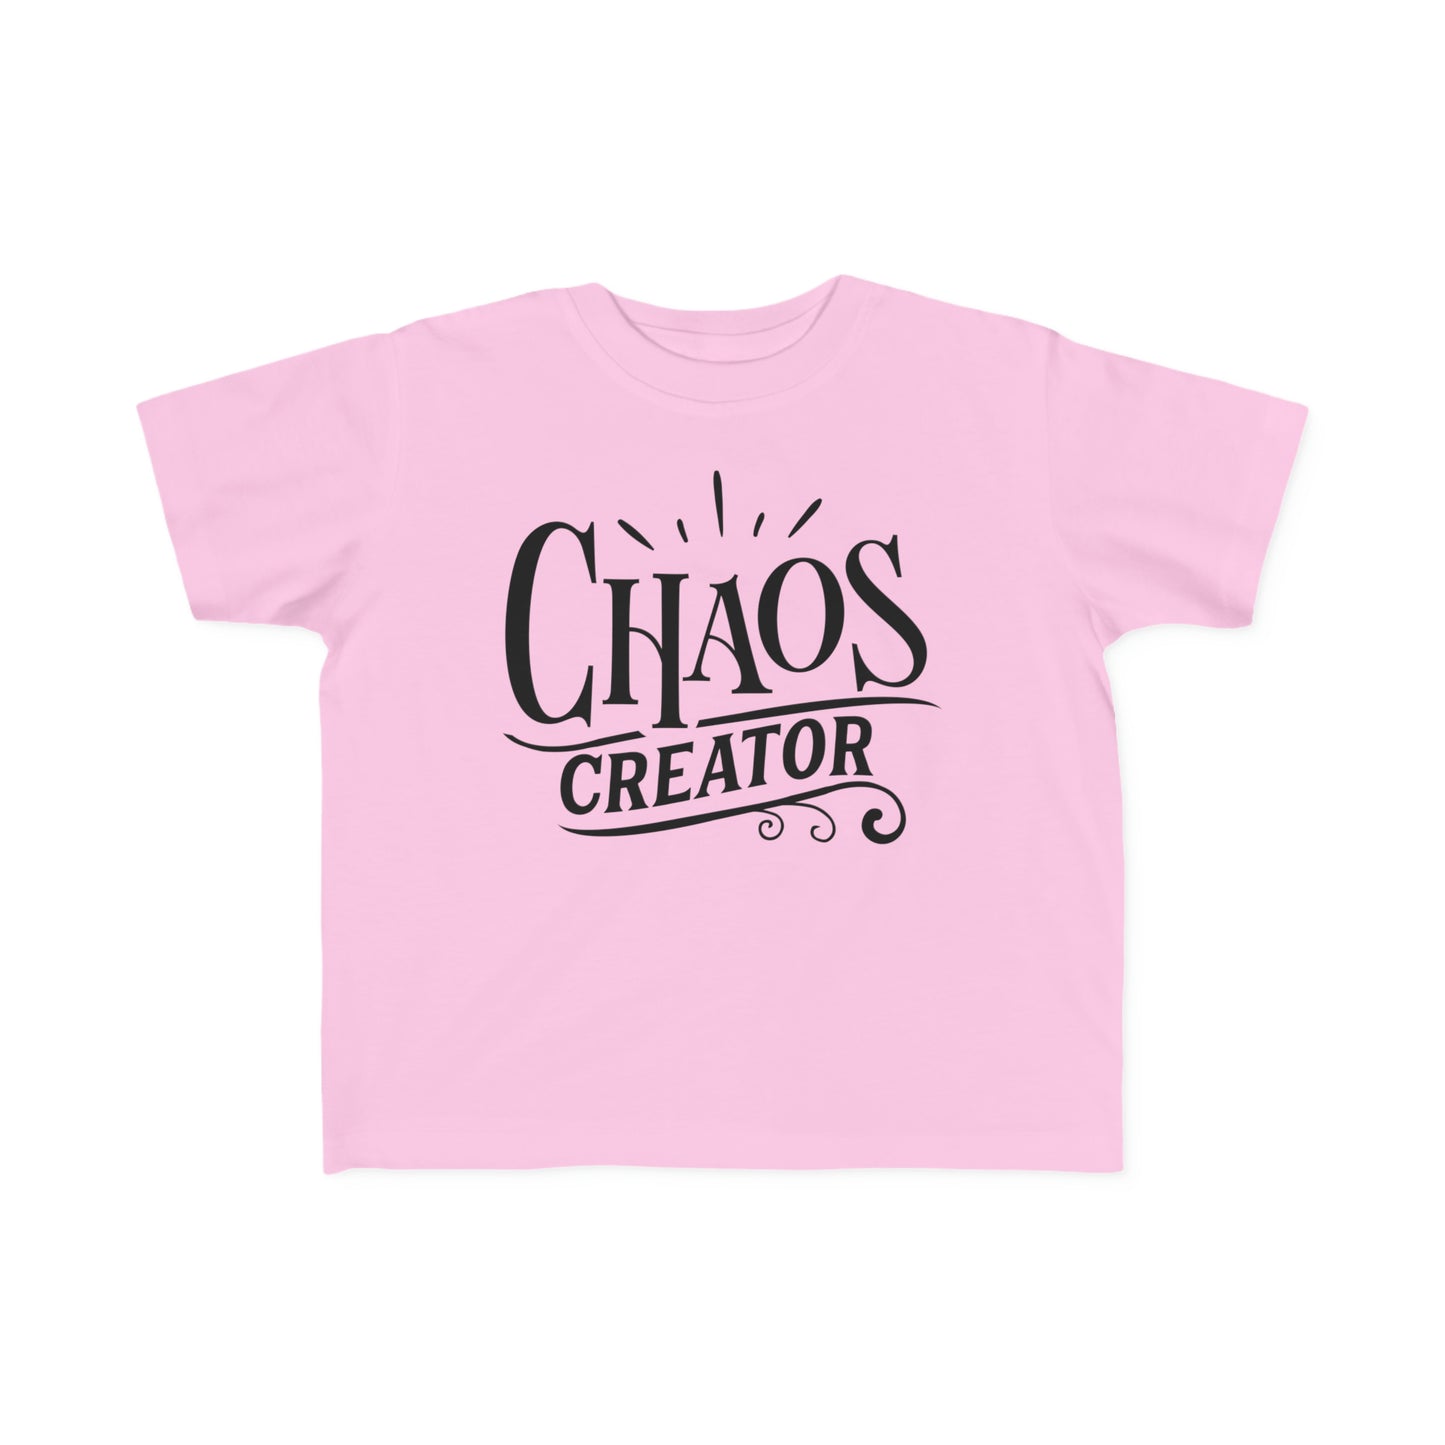 Chaos Creator Toddler's Fine Jersey Tee